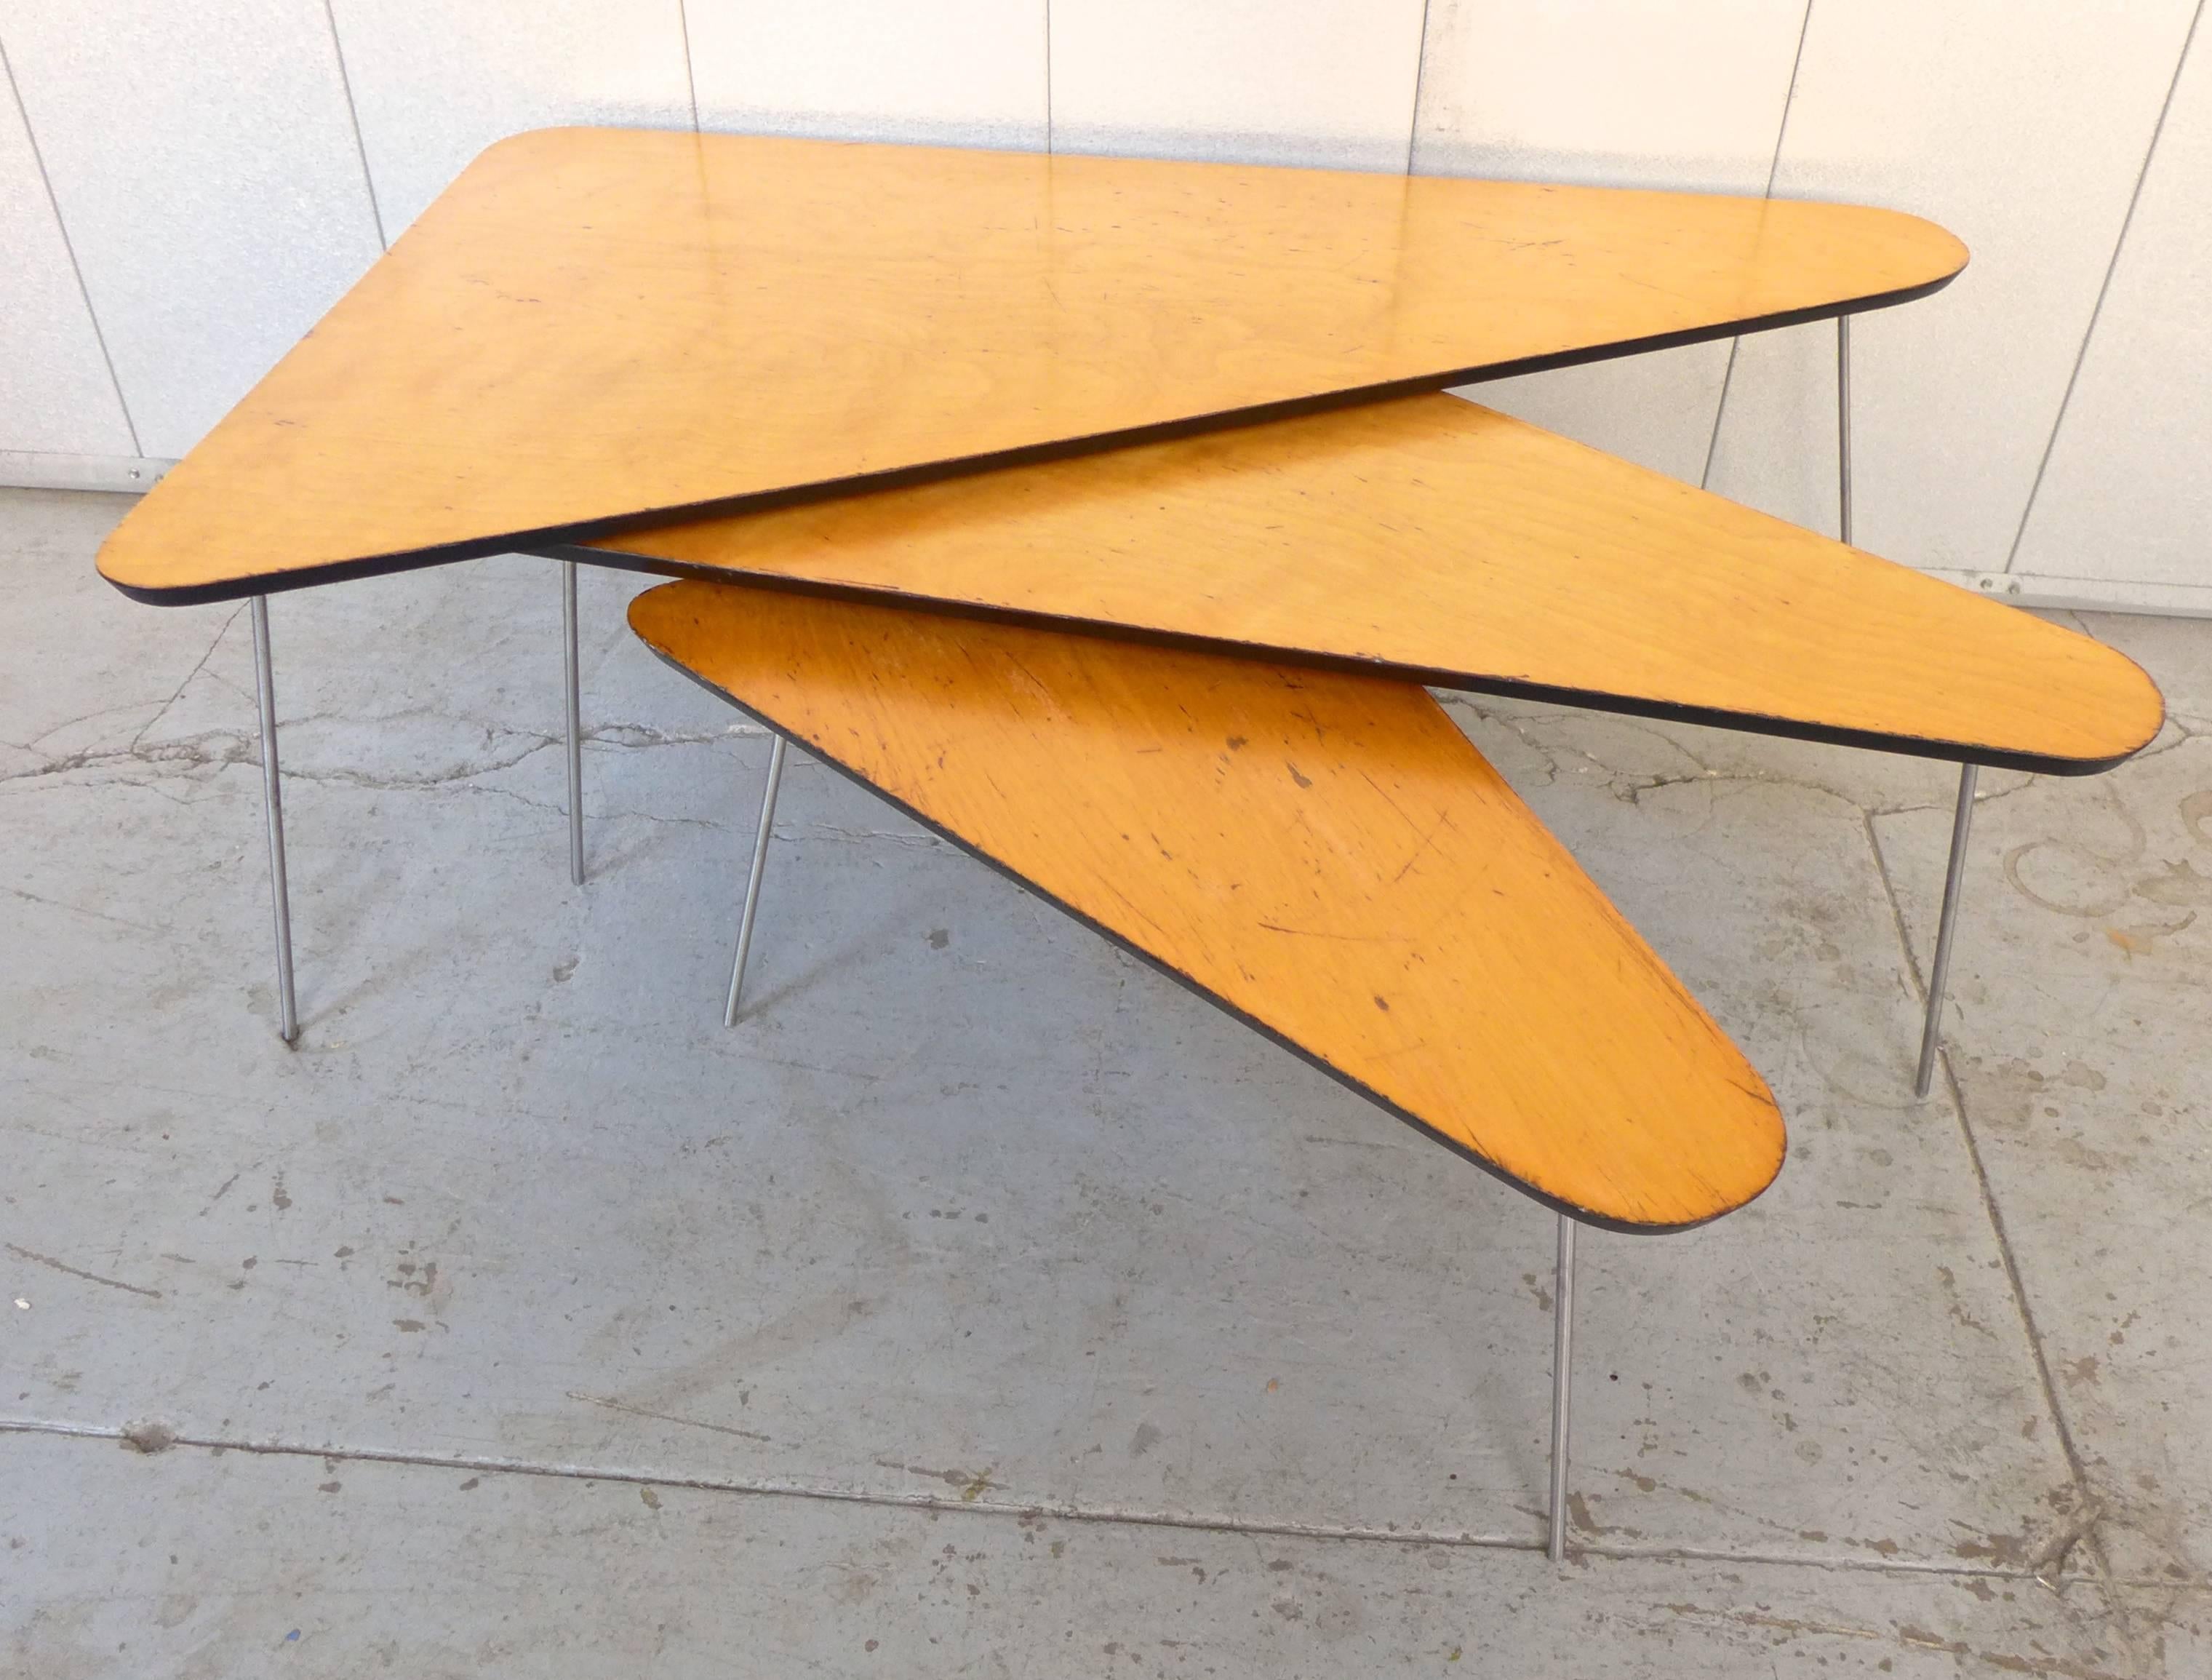 Nest of three triangular tables with rounded beveled edges. Birch tops, cold rolled steel legs. Designed by Joseph Carreiro and produced by Pine and Baker of Cambridge, MA, c. 1950. A native of Cambridge, Carreiro studied at the Massachusetts School